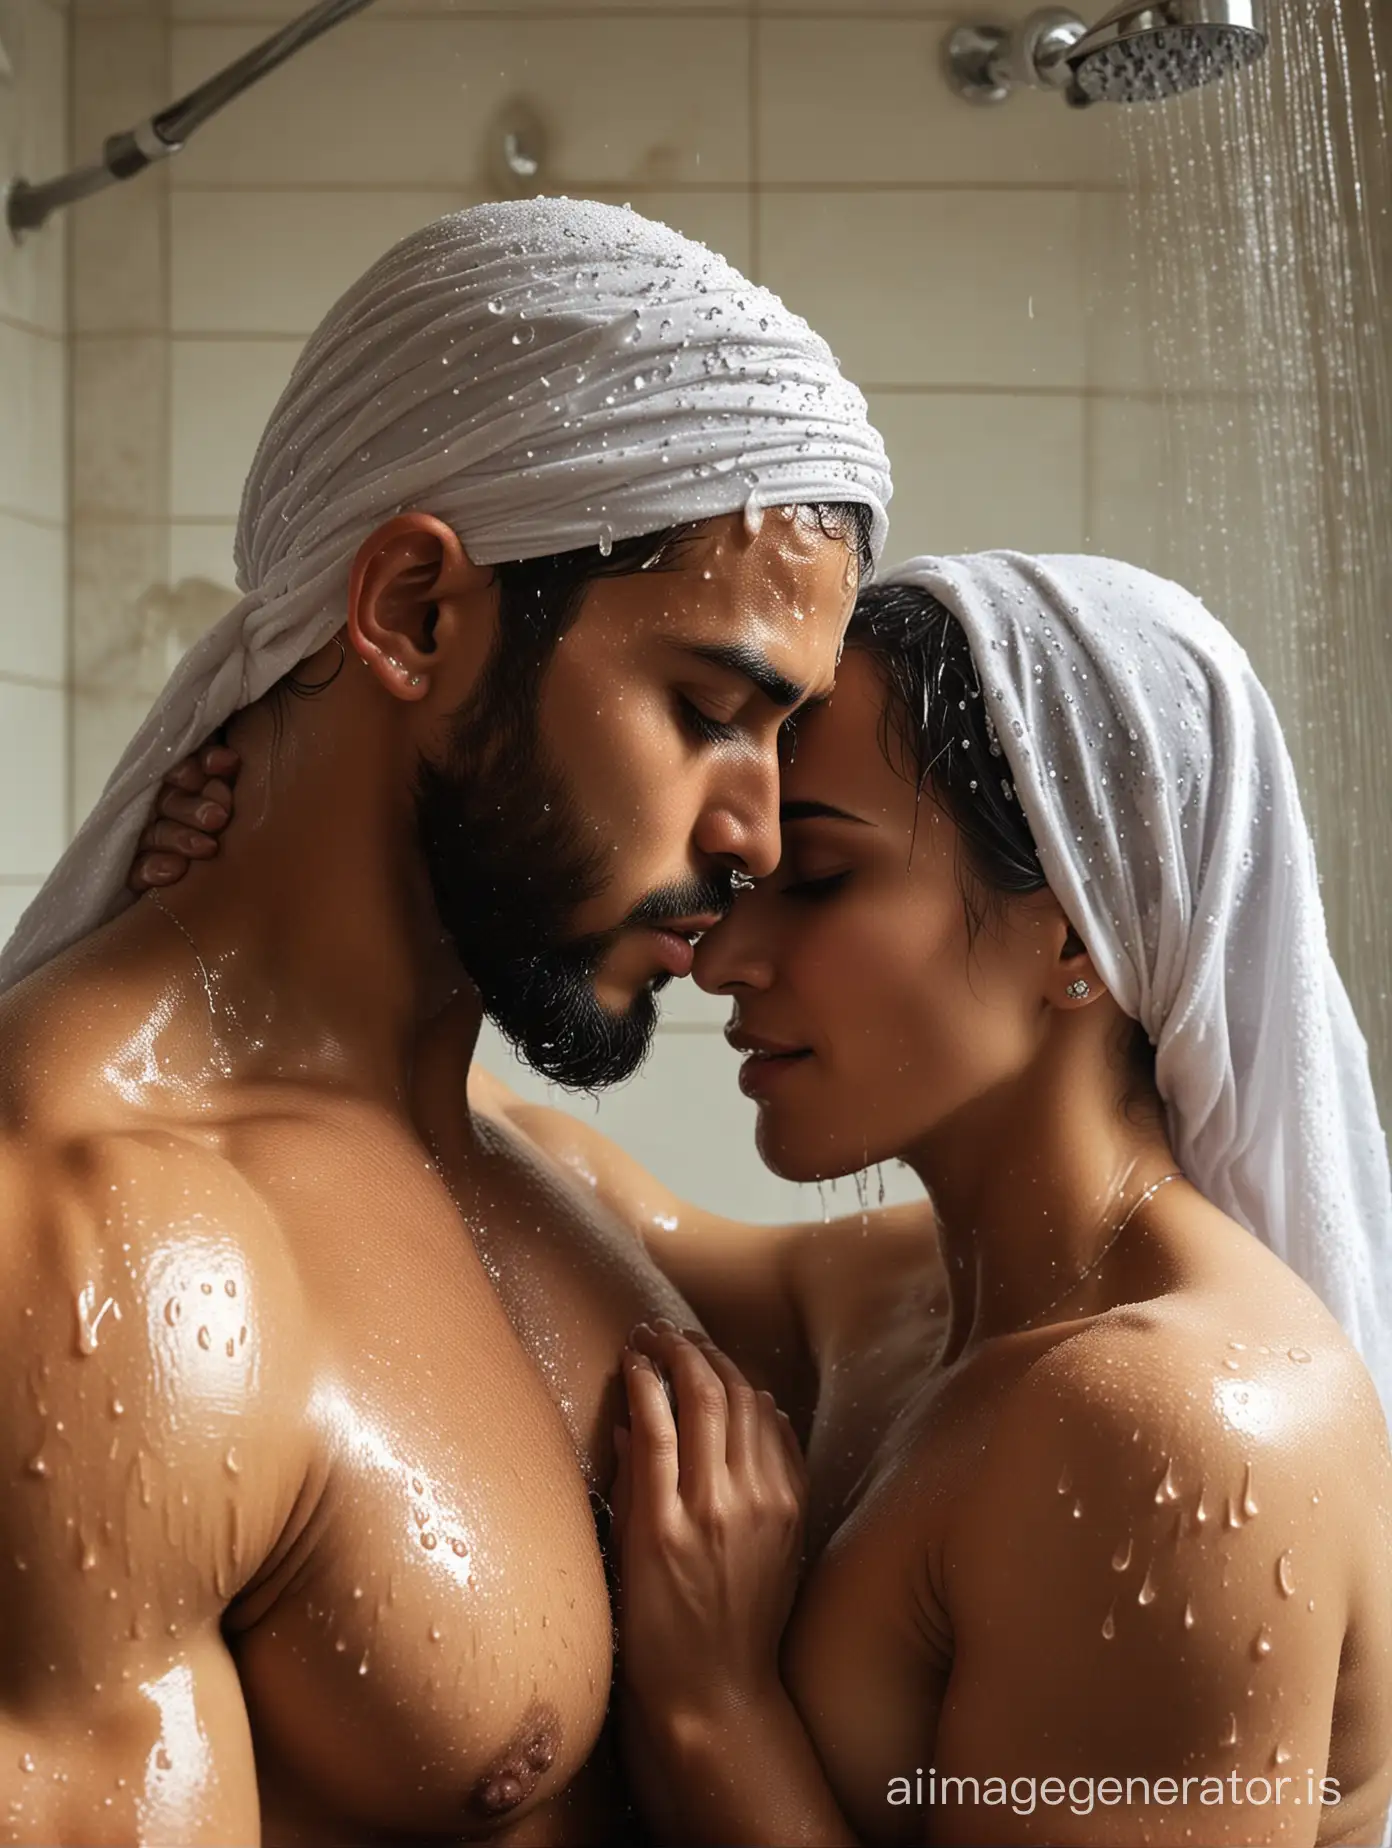 Interfaith-Love-Christian-Male-and-Muslim-Female-Bodybuilders-Embrace-in-Luxurious-Shower